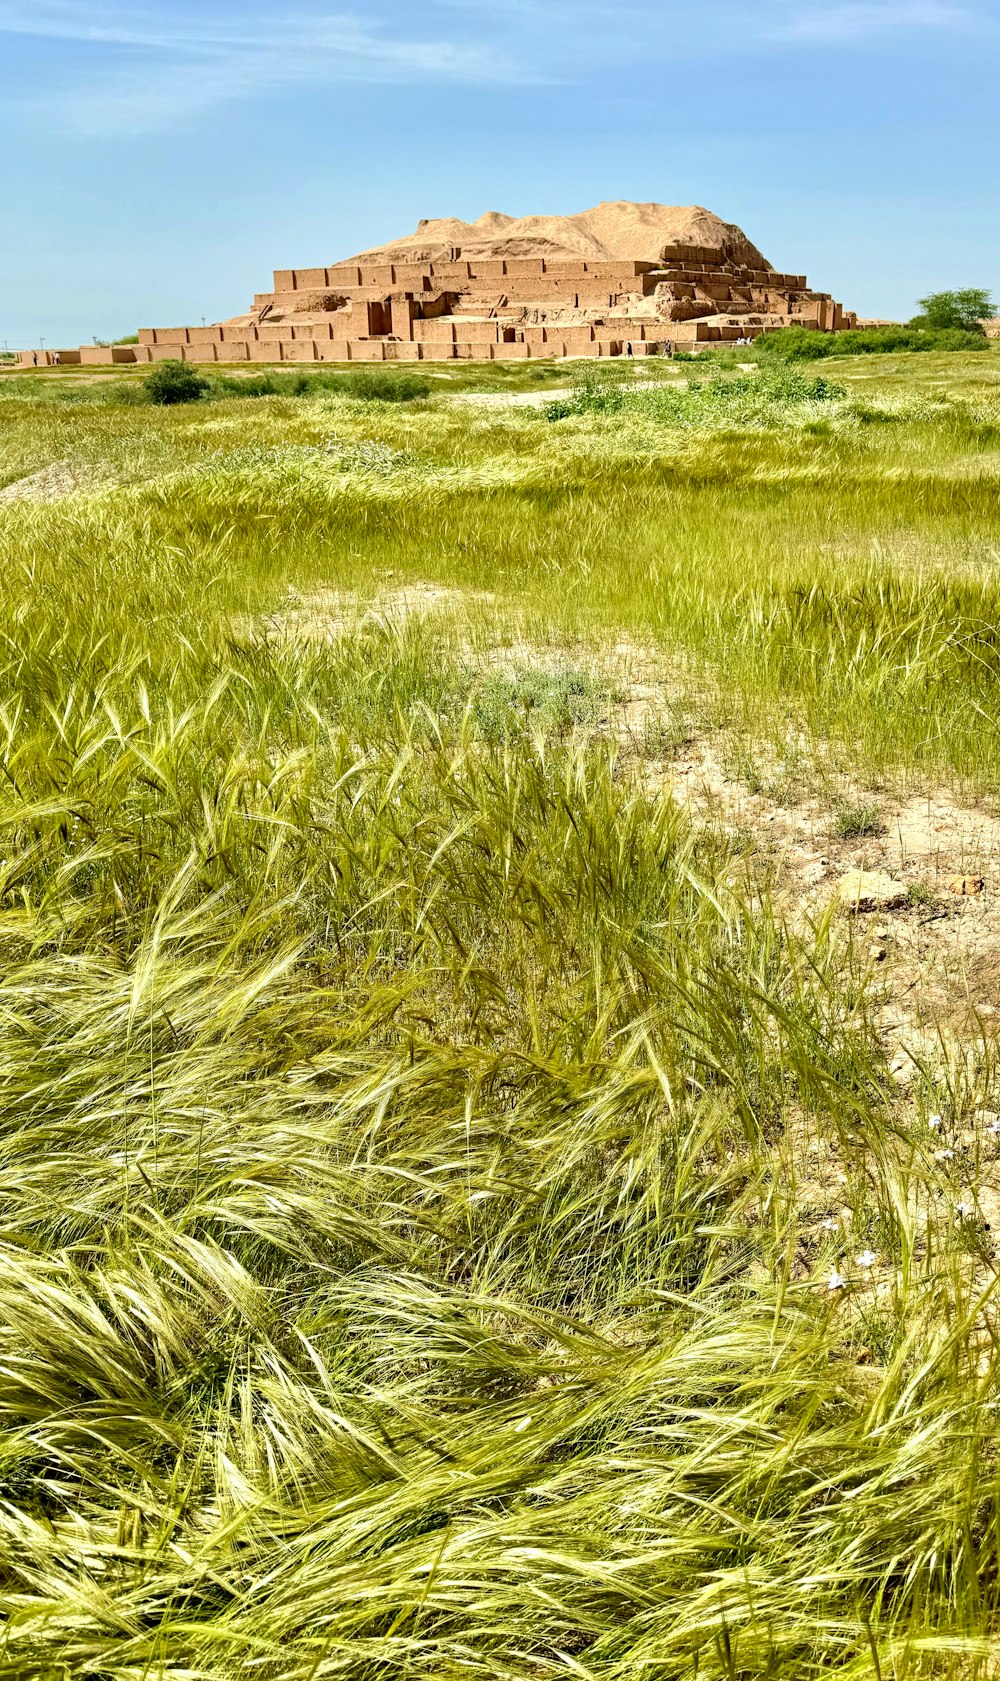 a grassy field with a building in the background